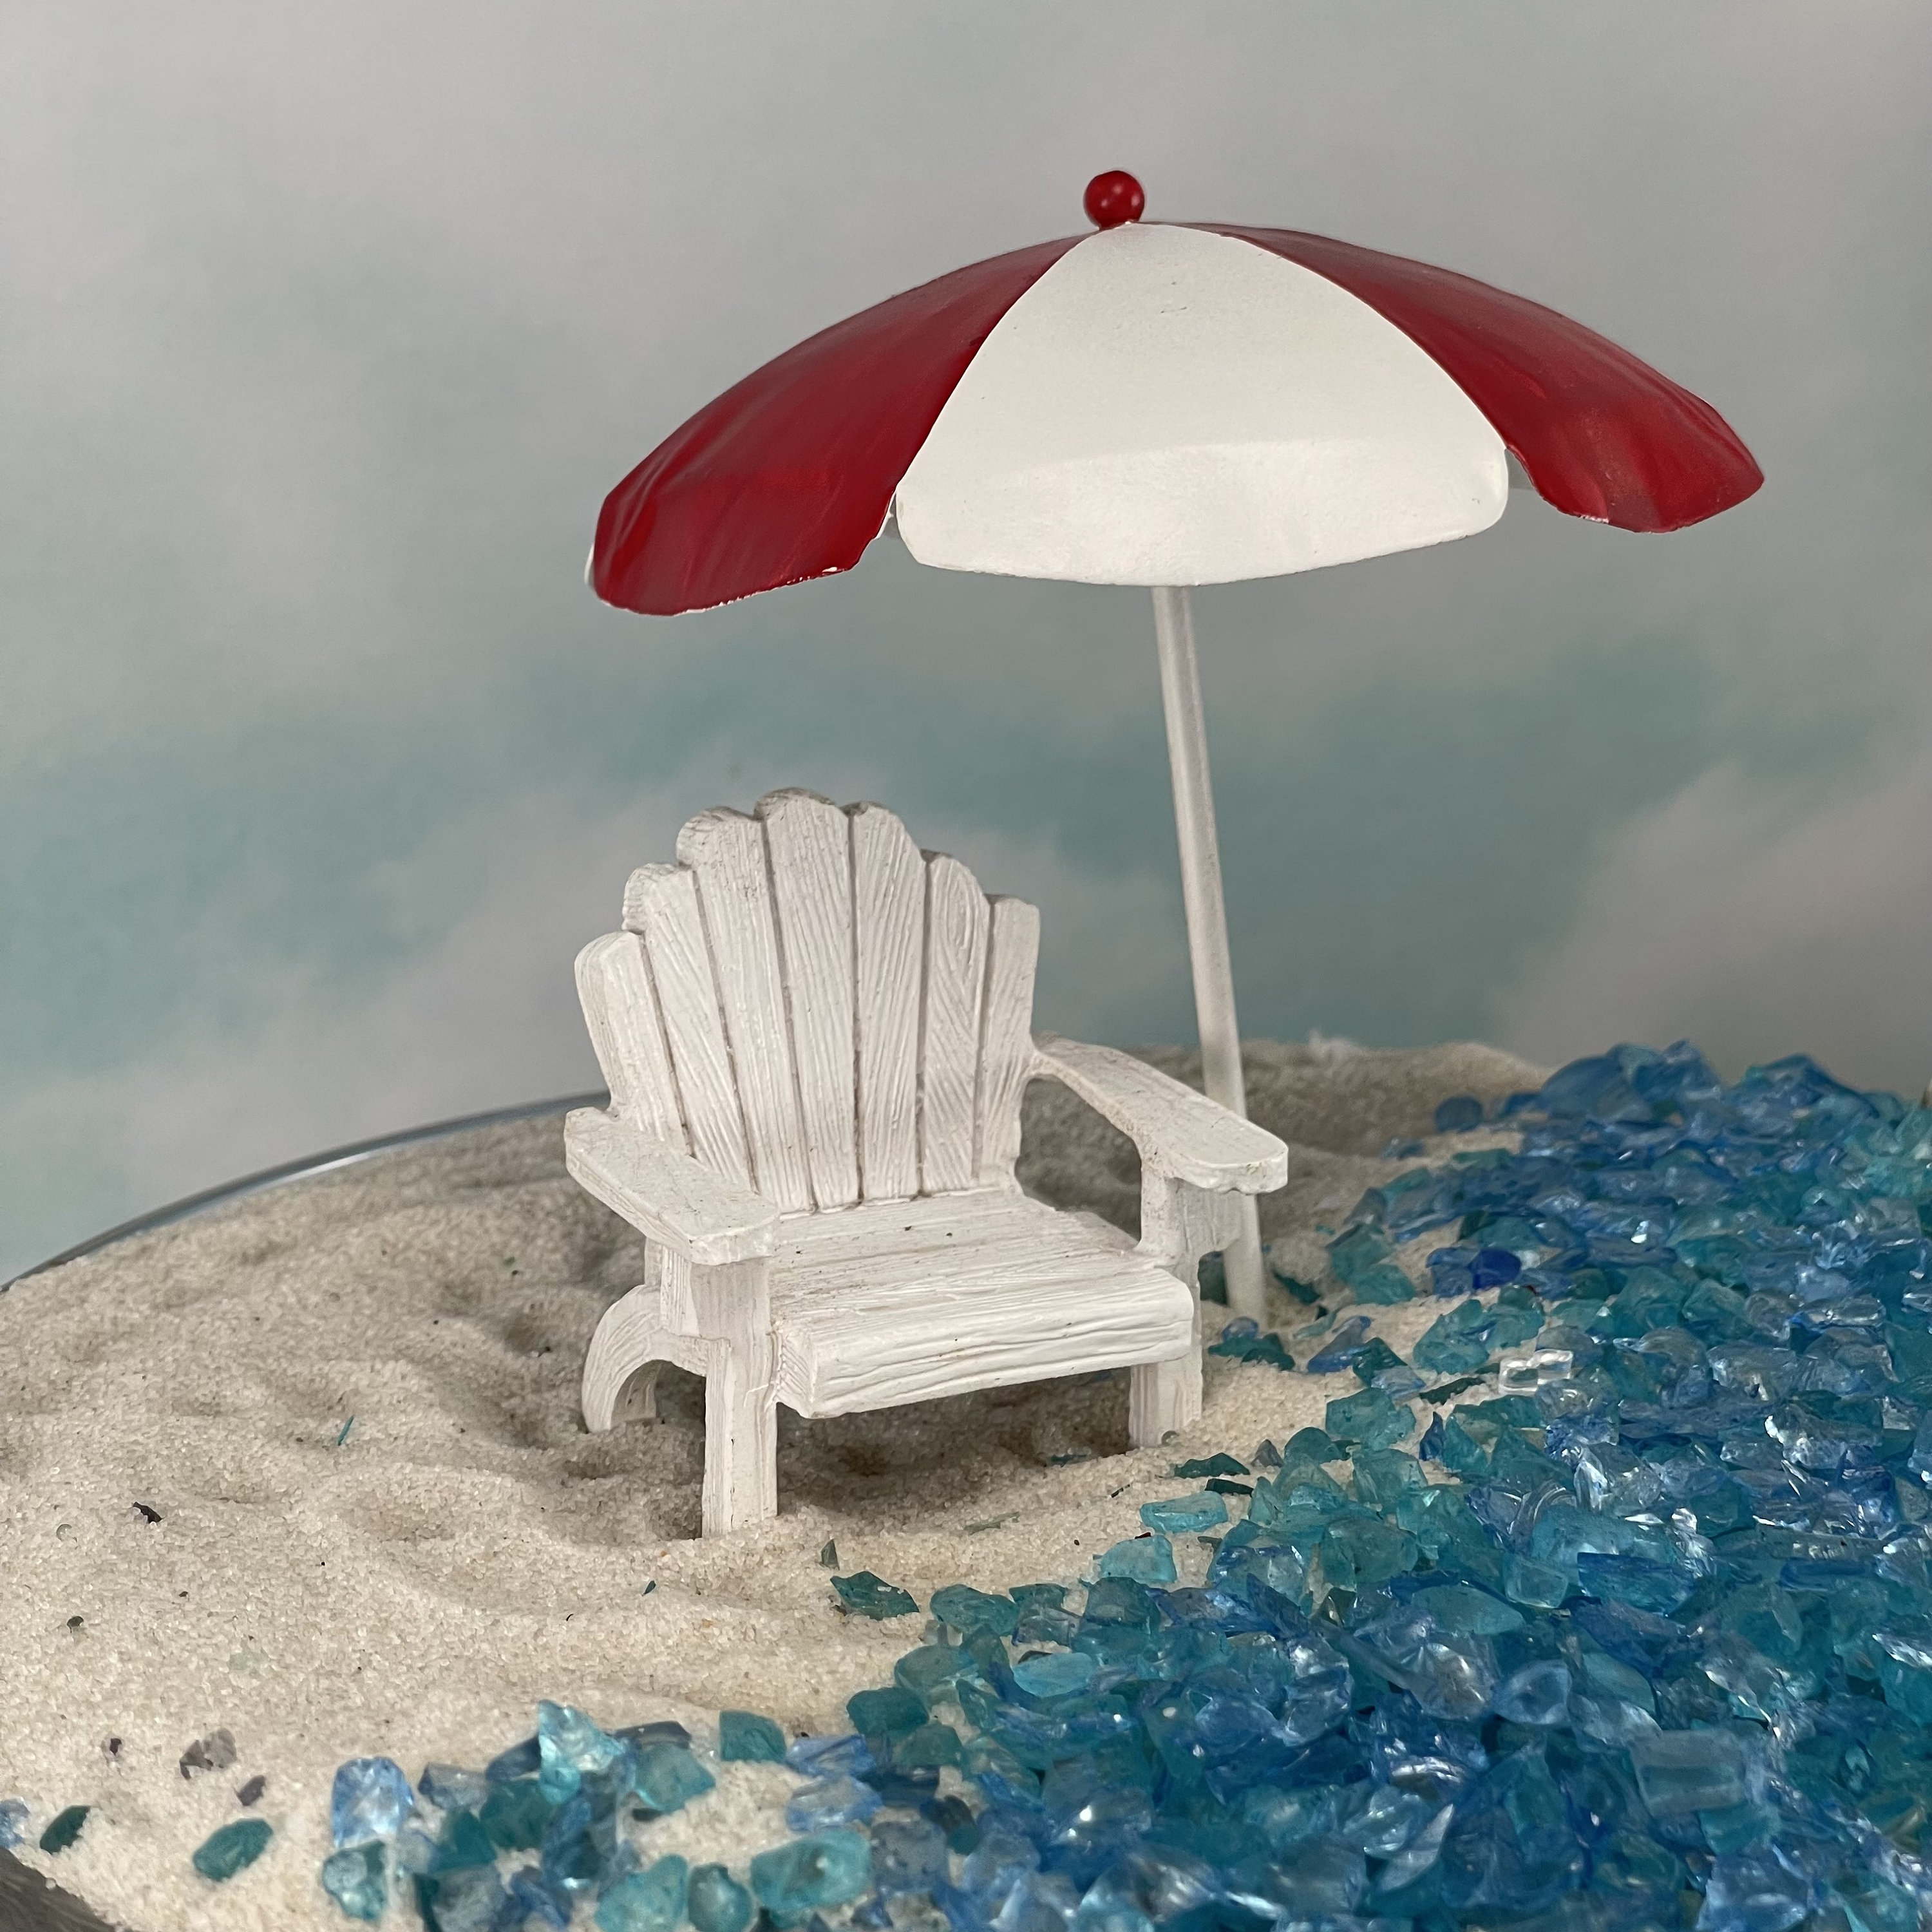 Classic Beach Scene With Faux Ric Rac Sand Umbrella and Pail 